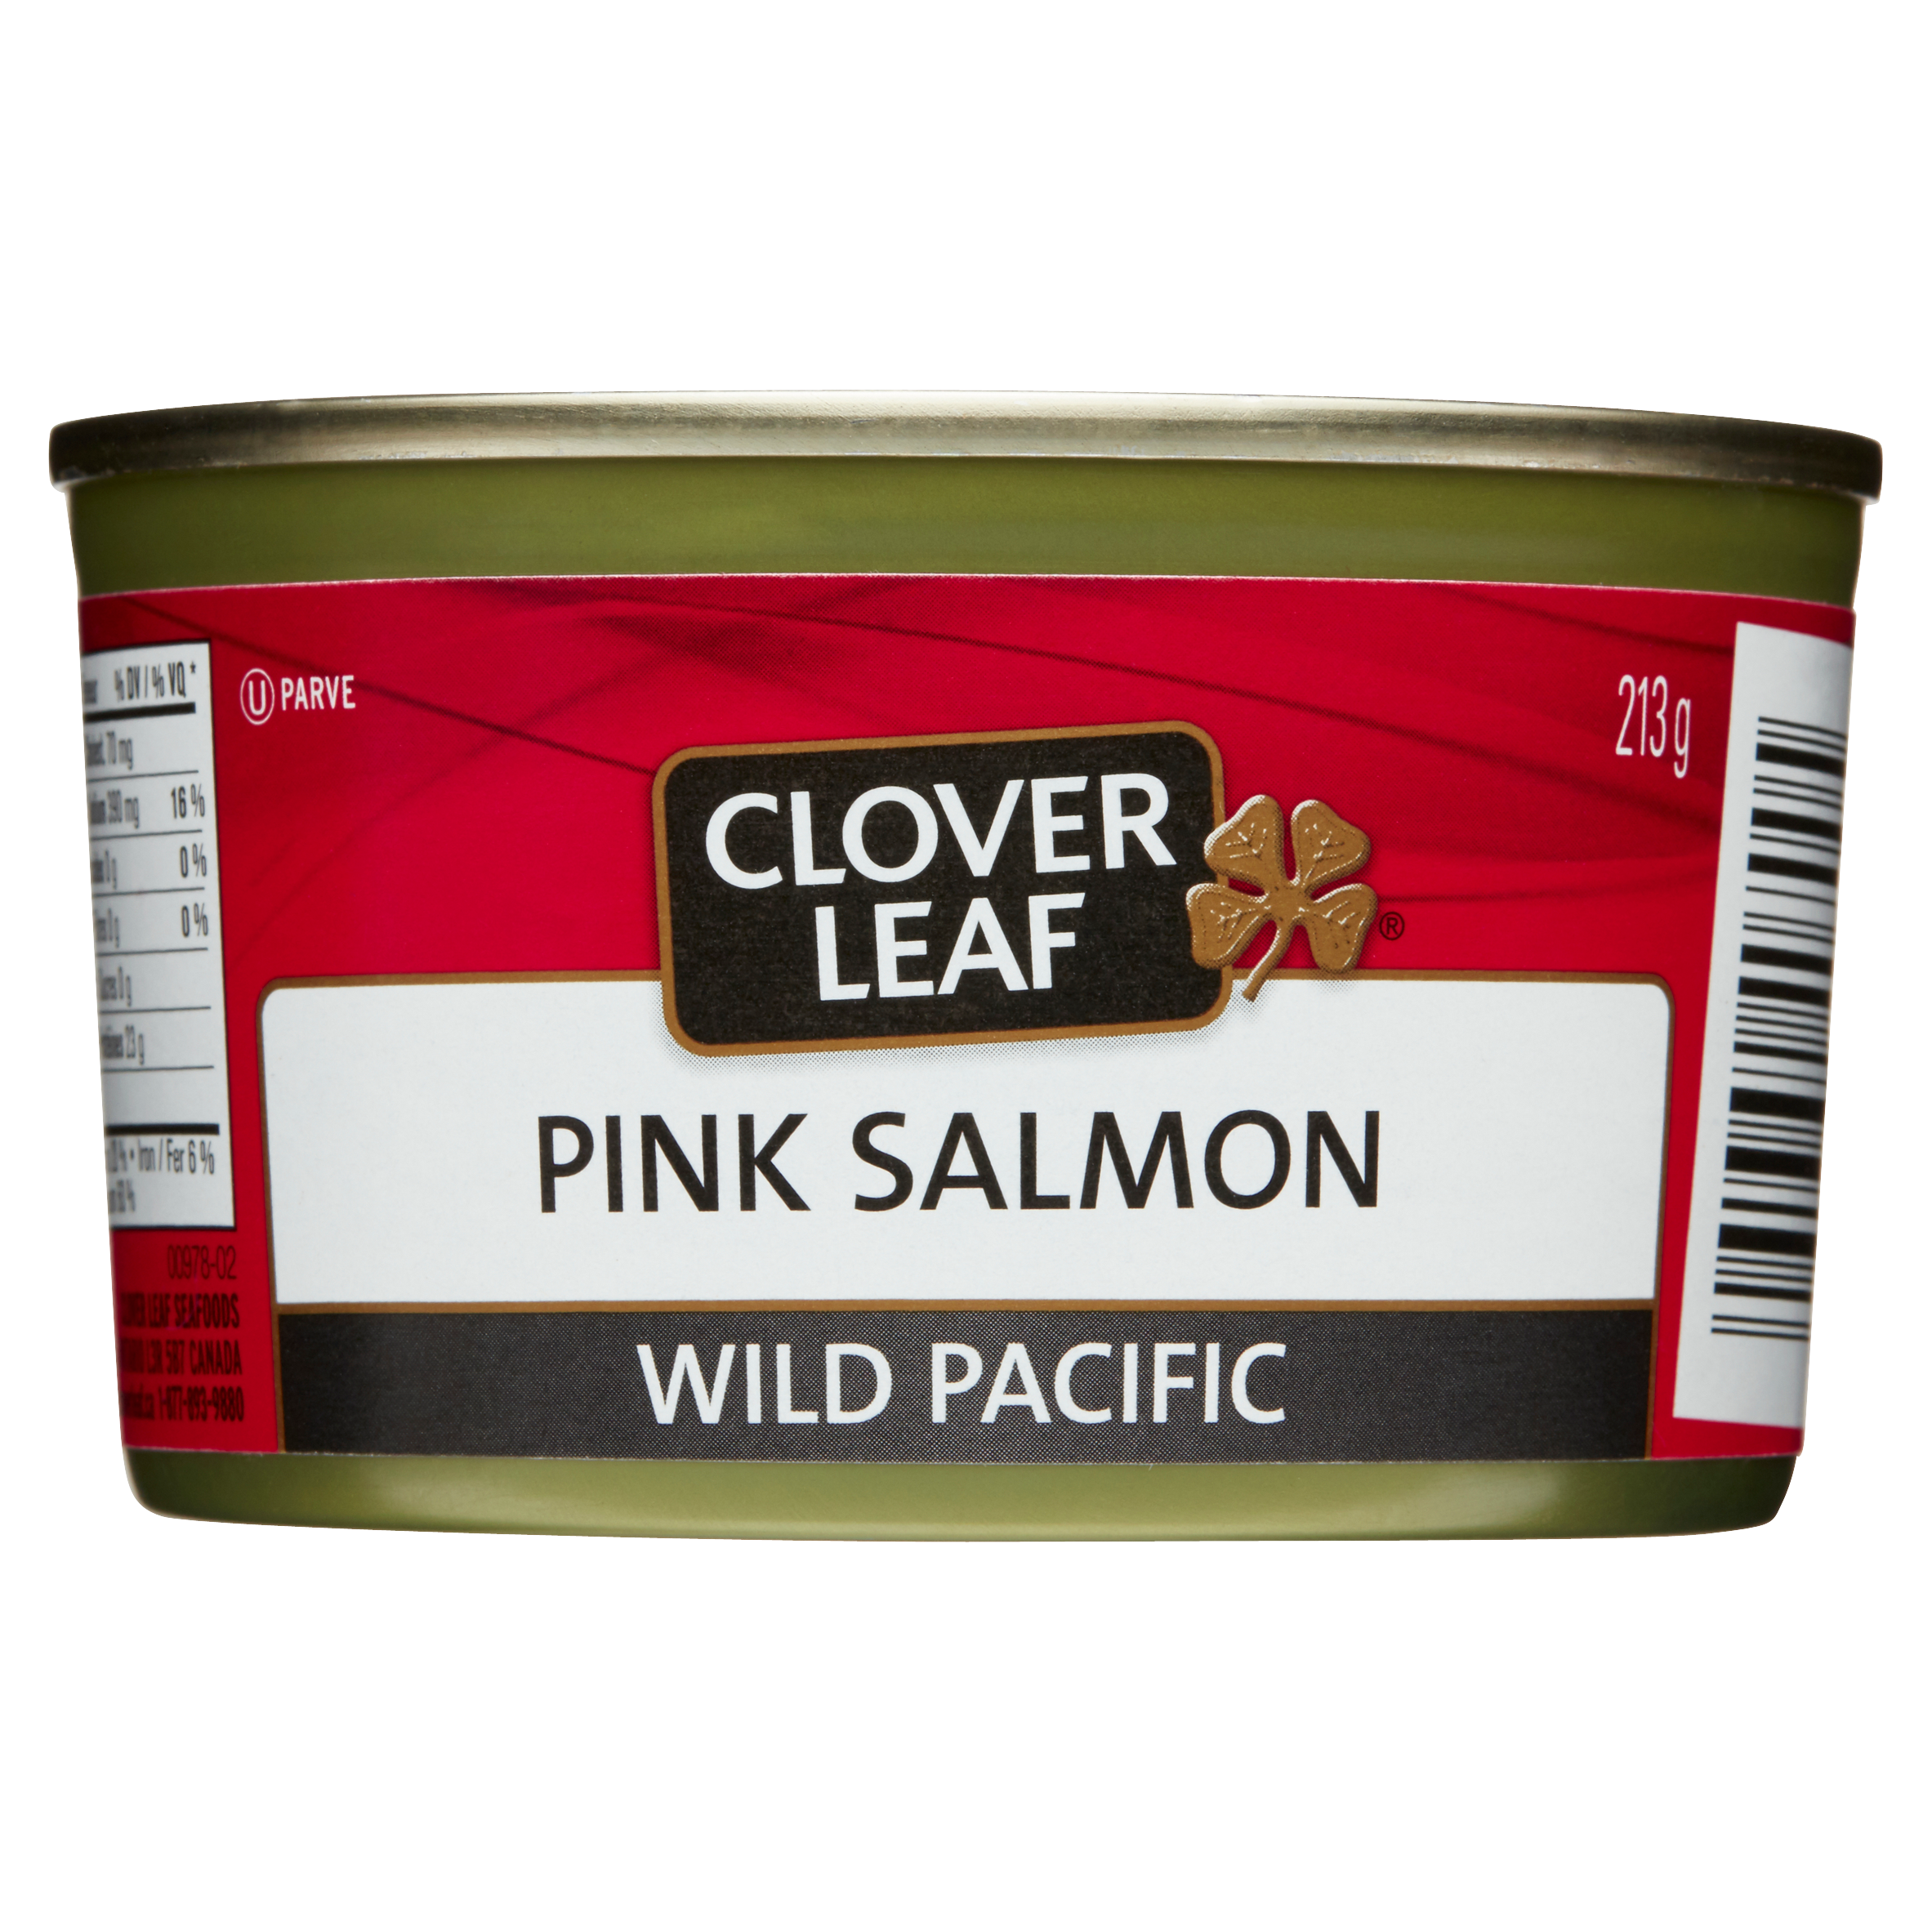 Clover Leaf Pink Salmon Wild Pacific 213 g | Powell's Supermarkets